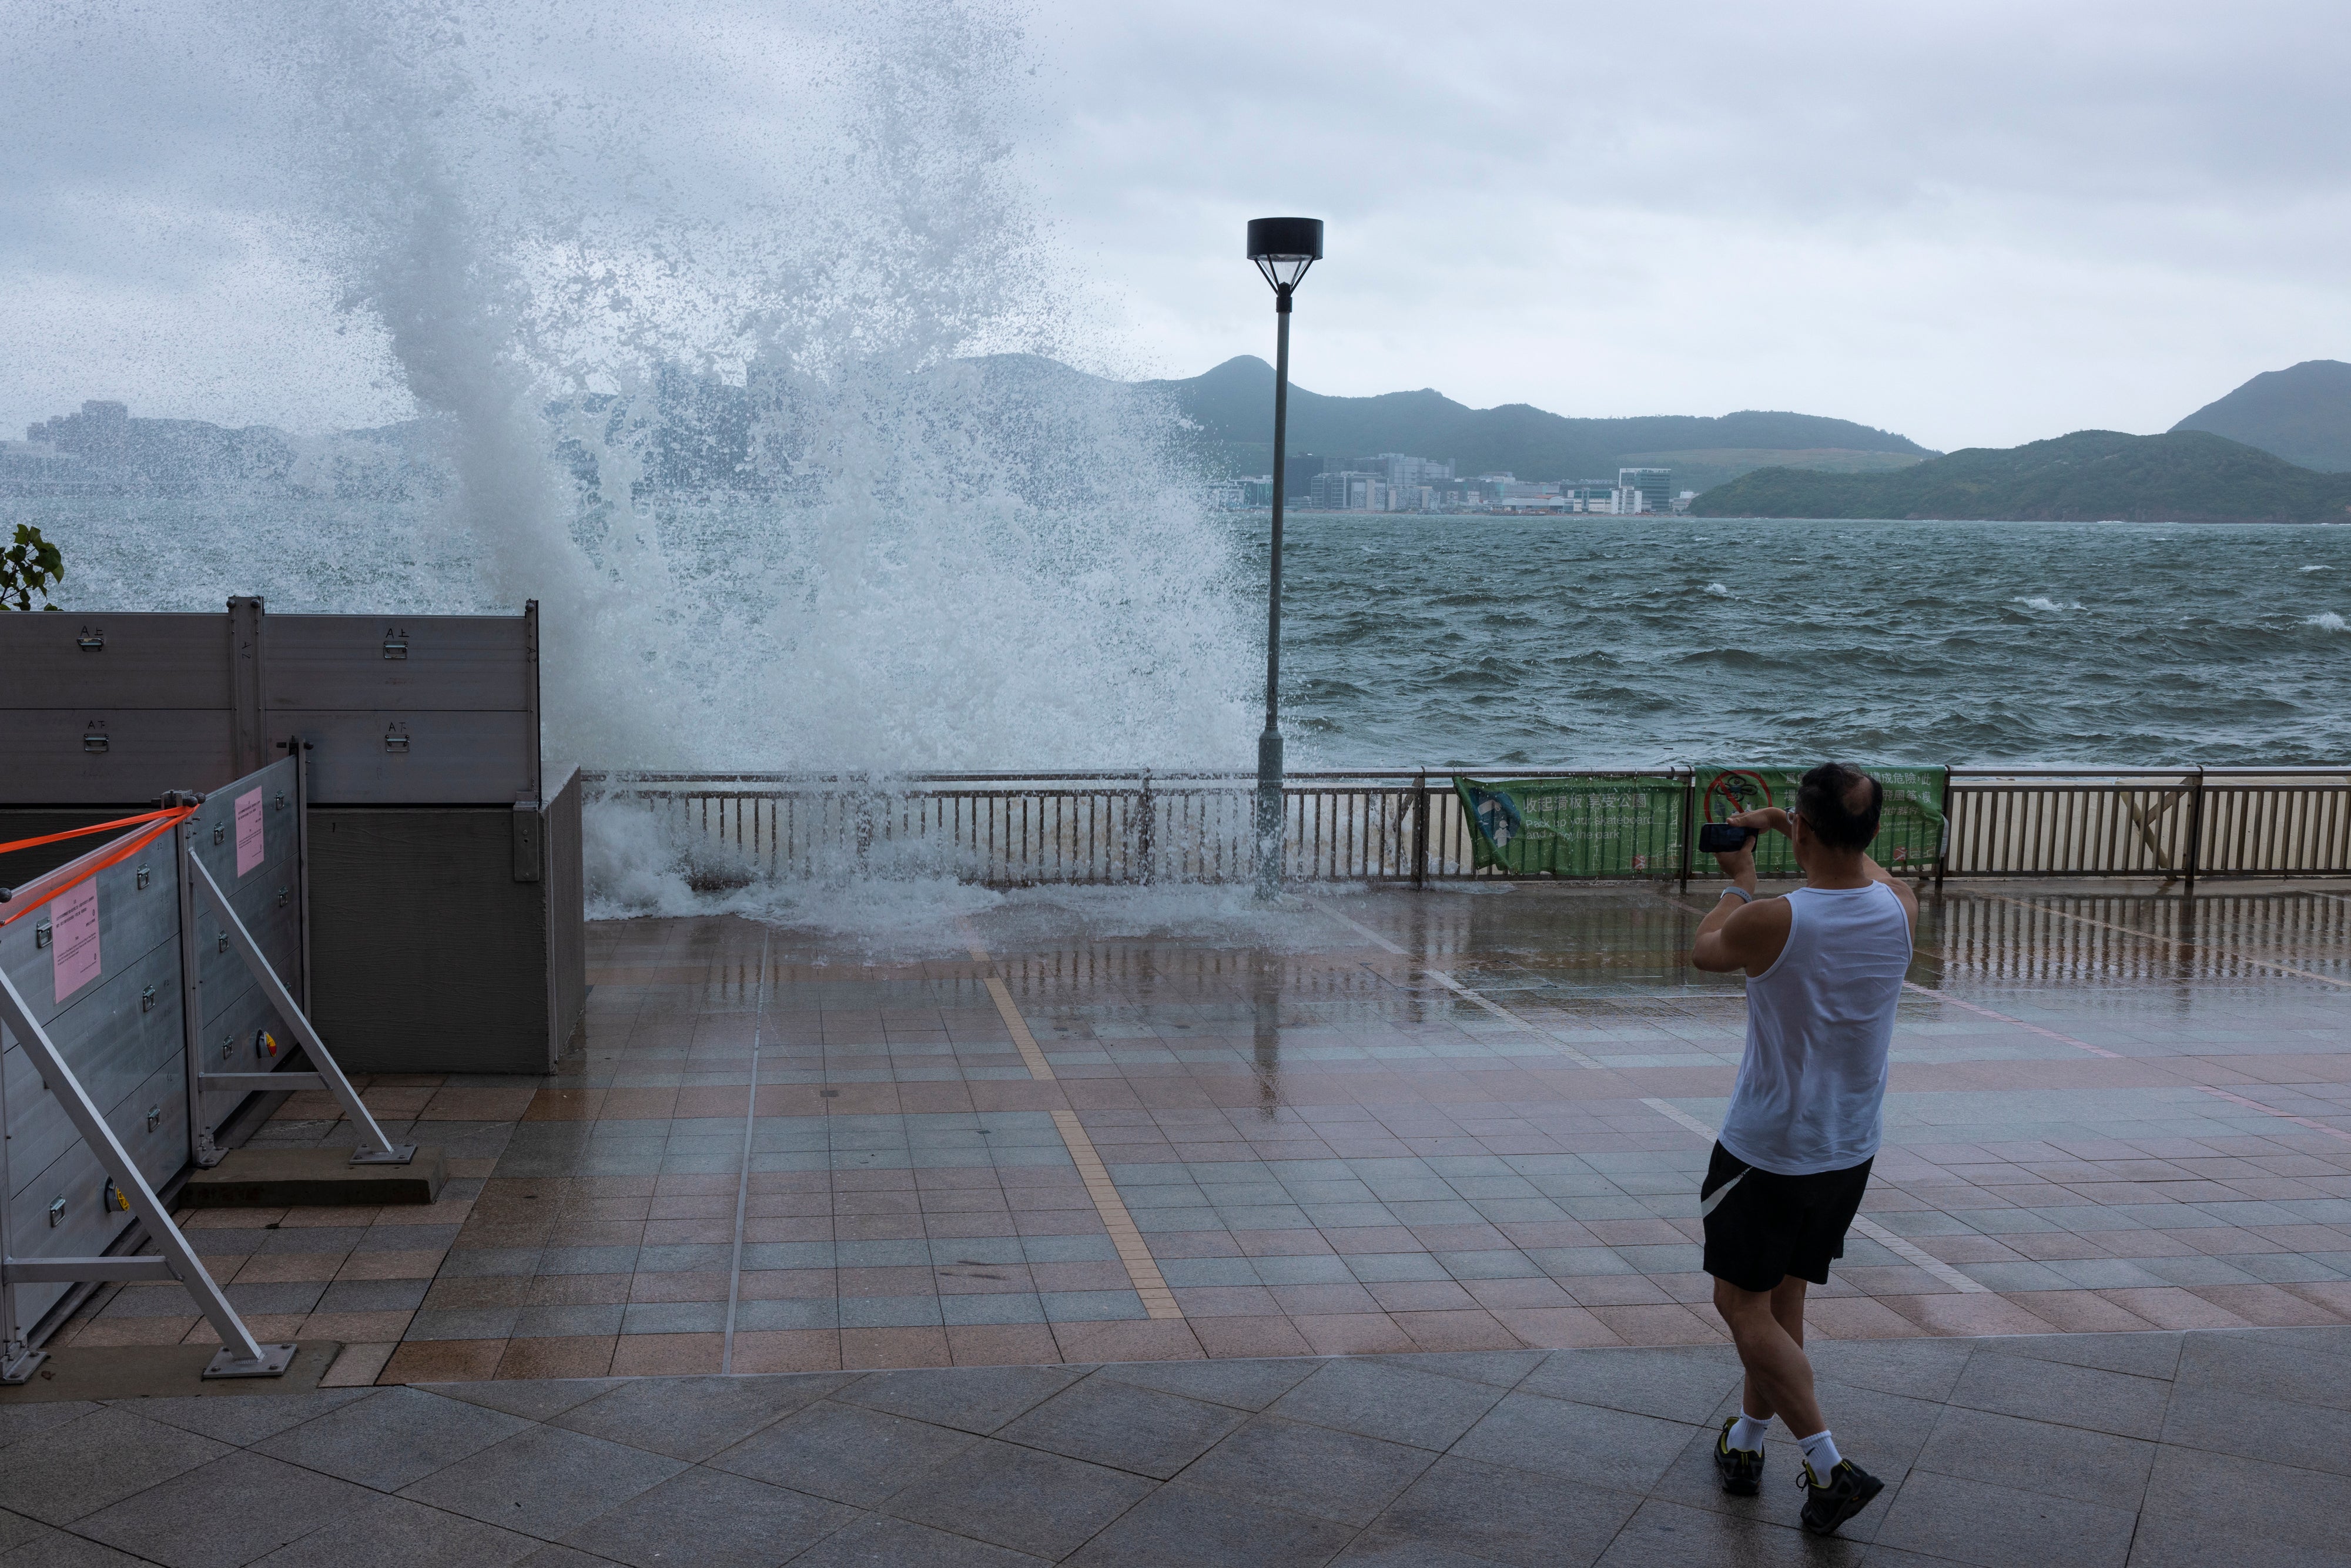 A man looks at the waves on a promenade during a typhoon in Hong Kong